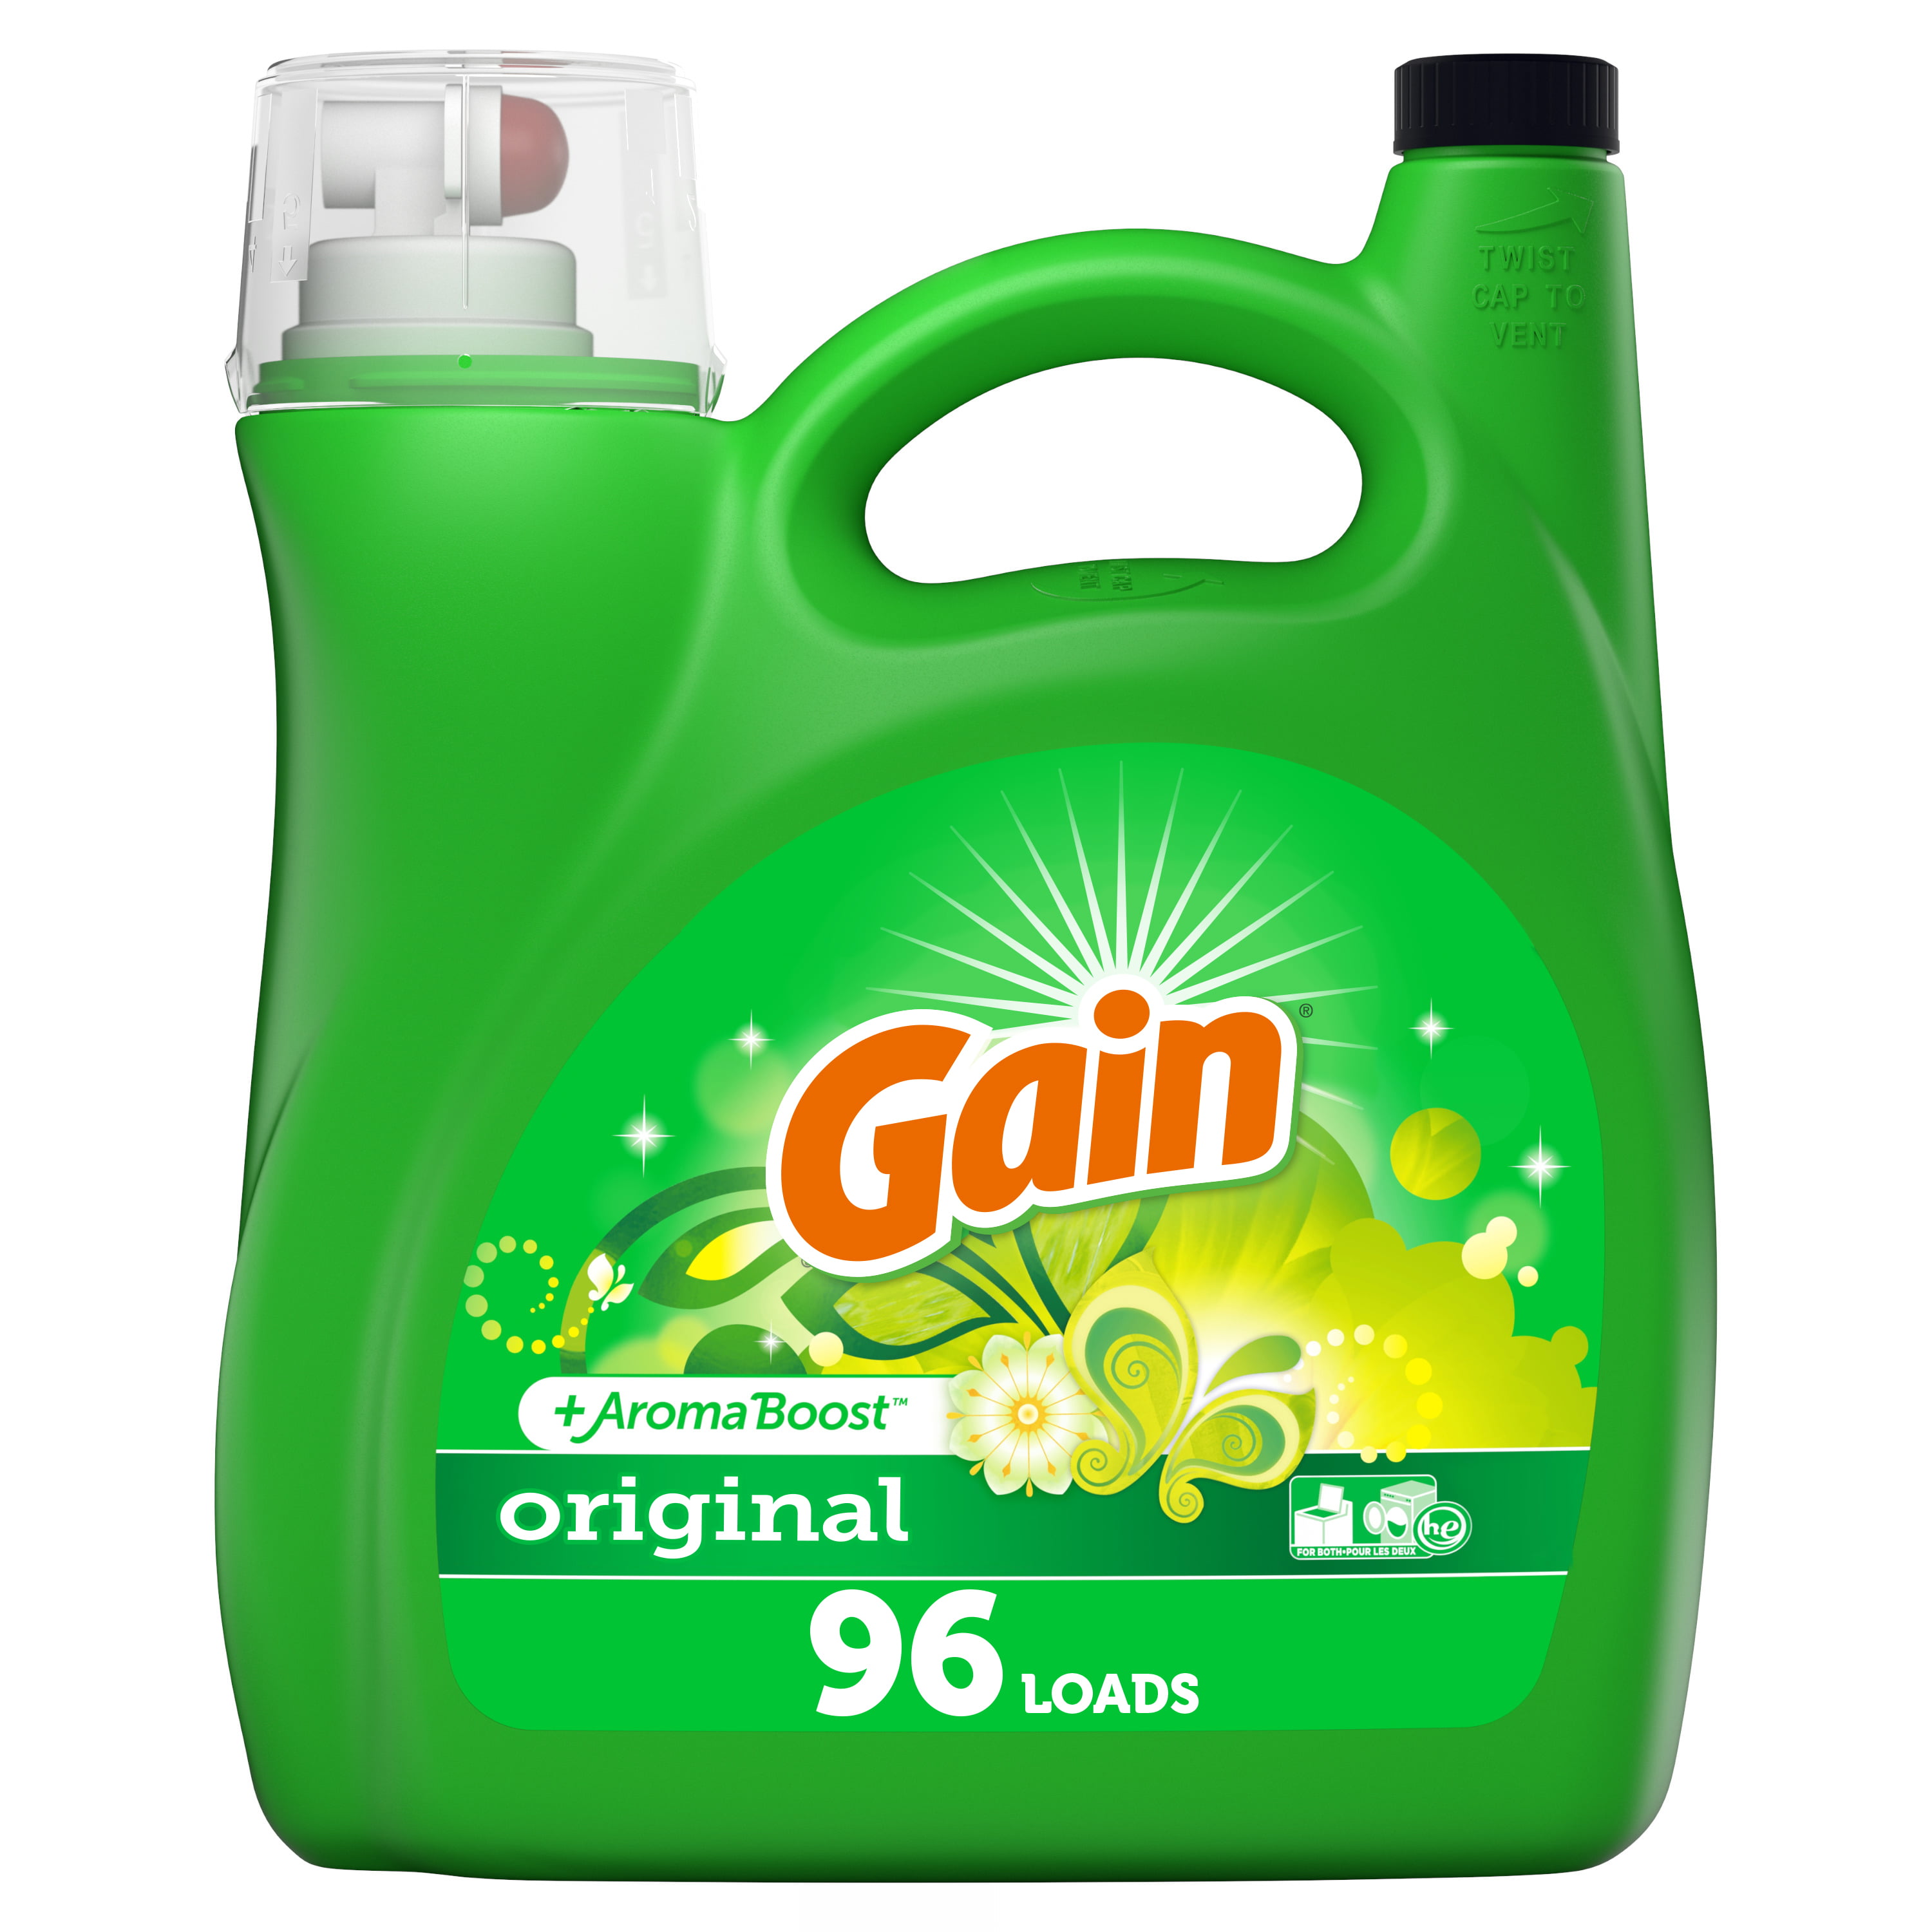 laundry soap on sale